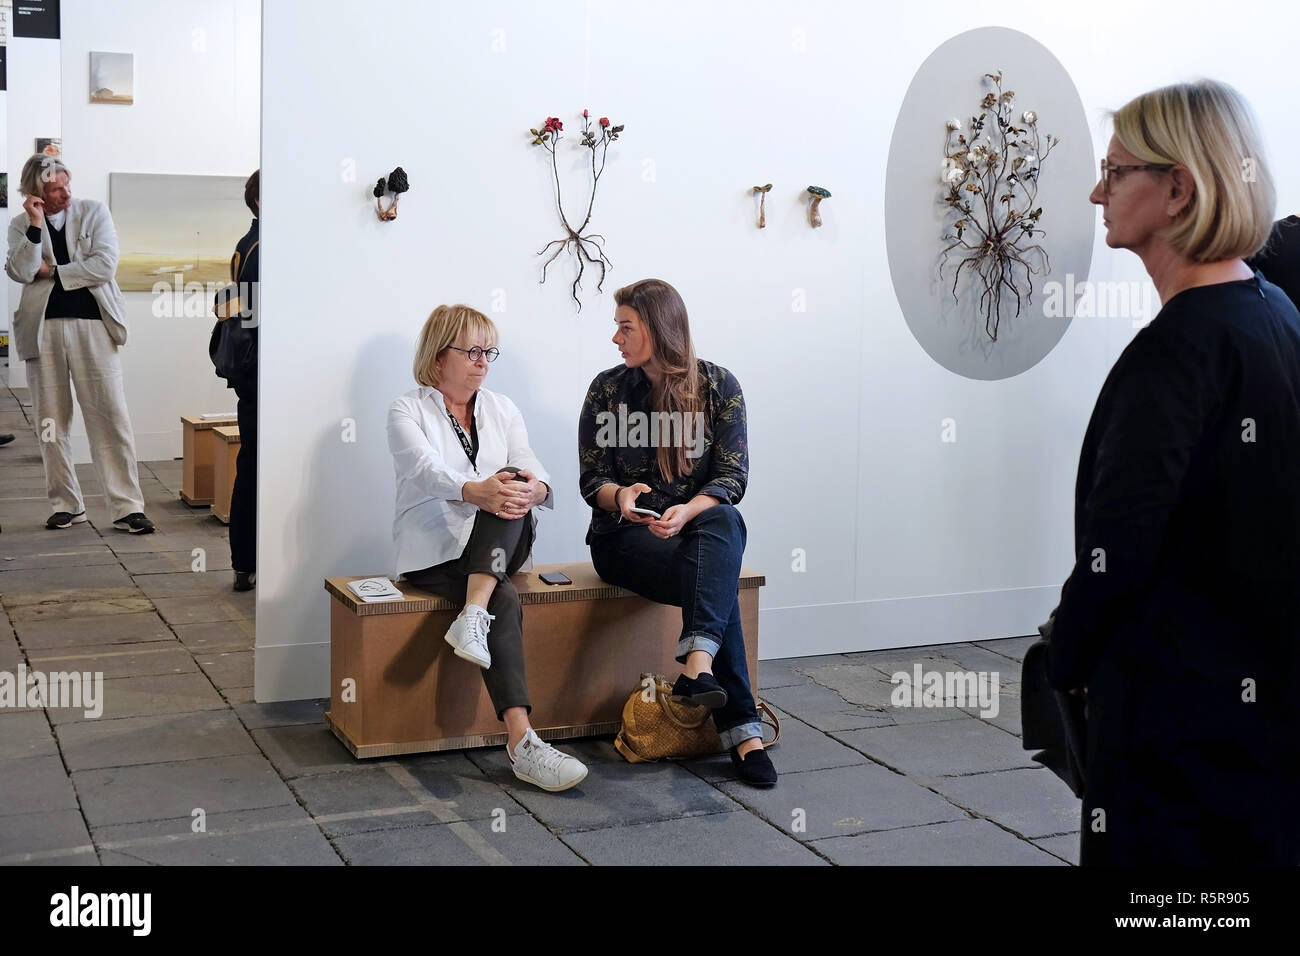 Berlin Art Week. Germany. September 2018. The most important contemporary art event. Venue: Tempelhof, museums and galleries in Berlin Stock Photo